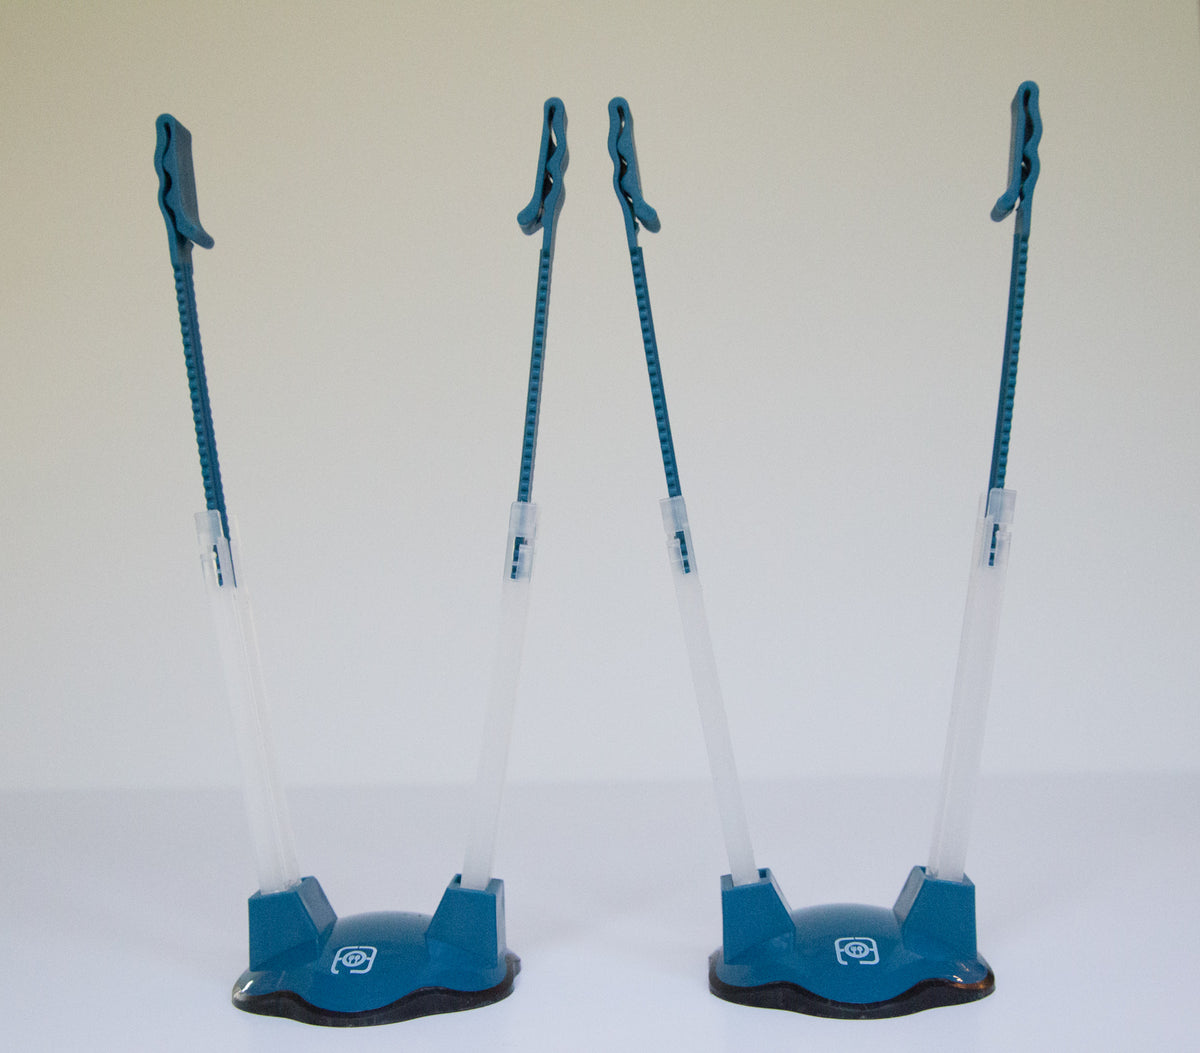 Freezer Meal Bag Stands (Set of 2) - Erin Chase Store